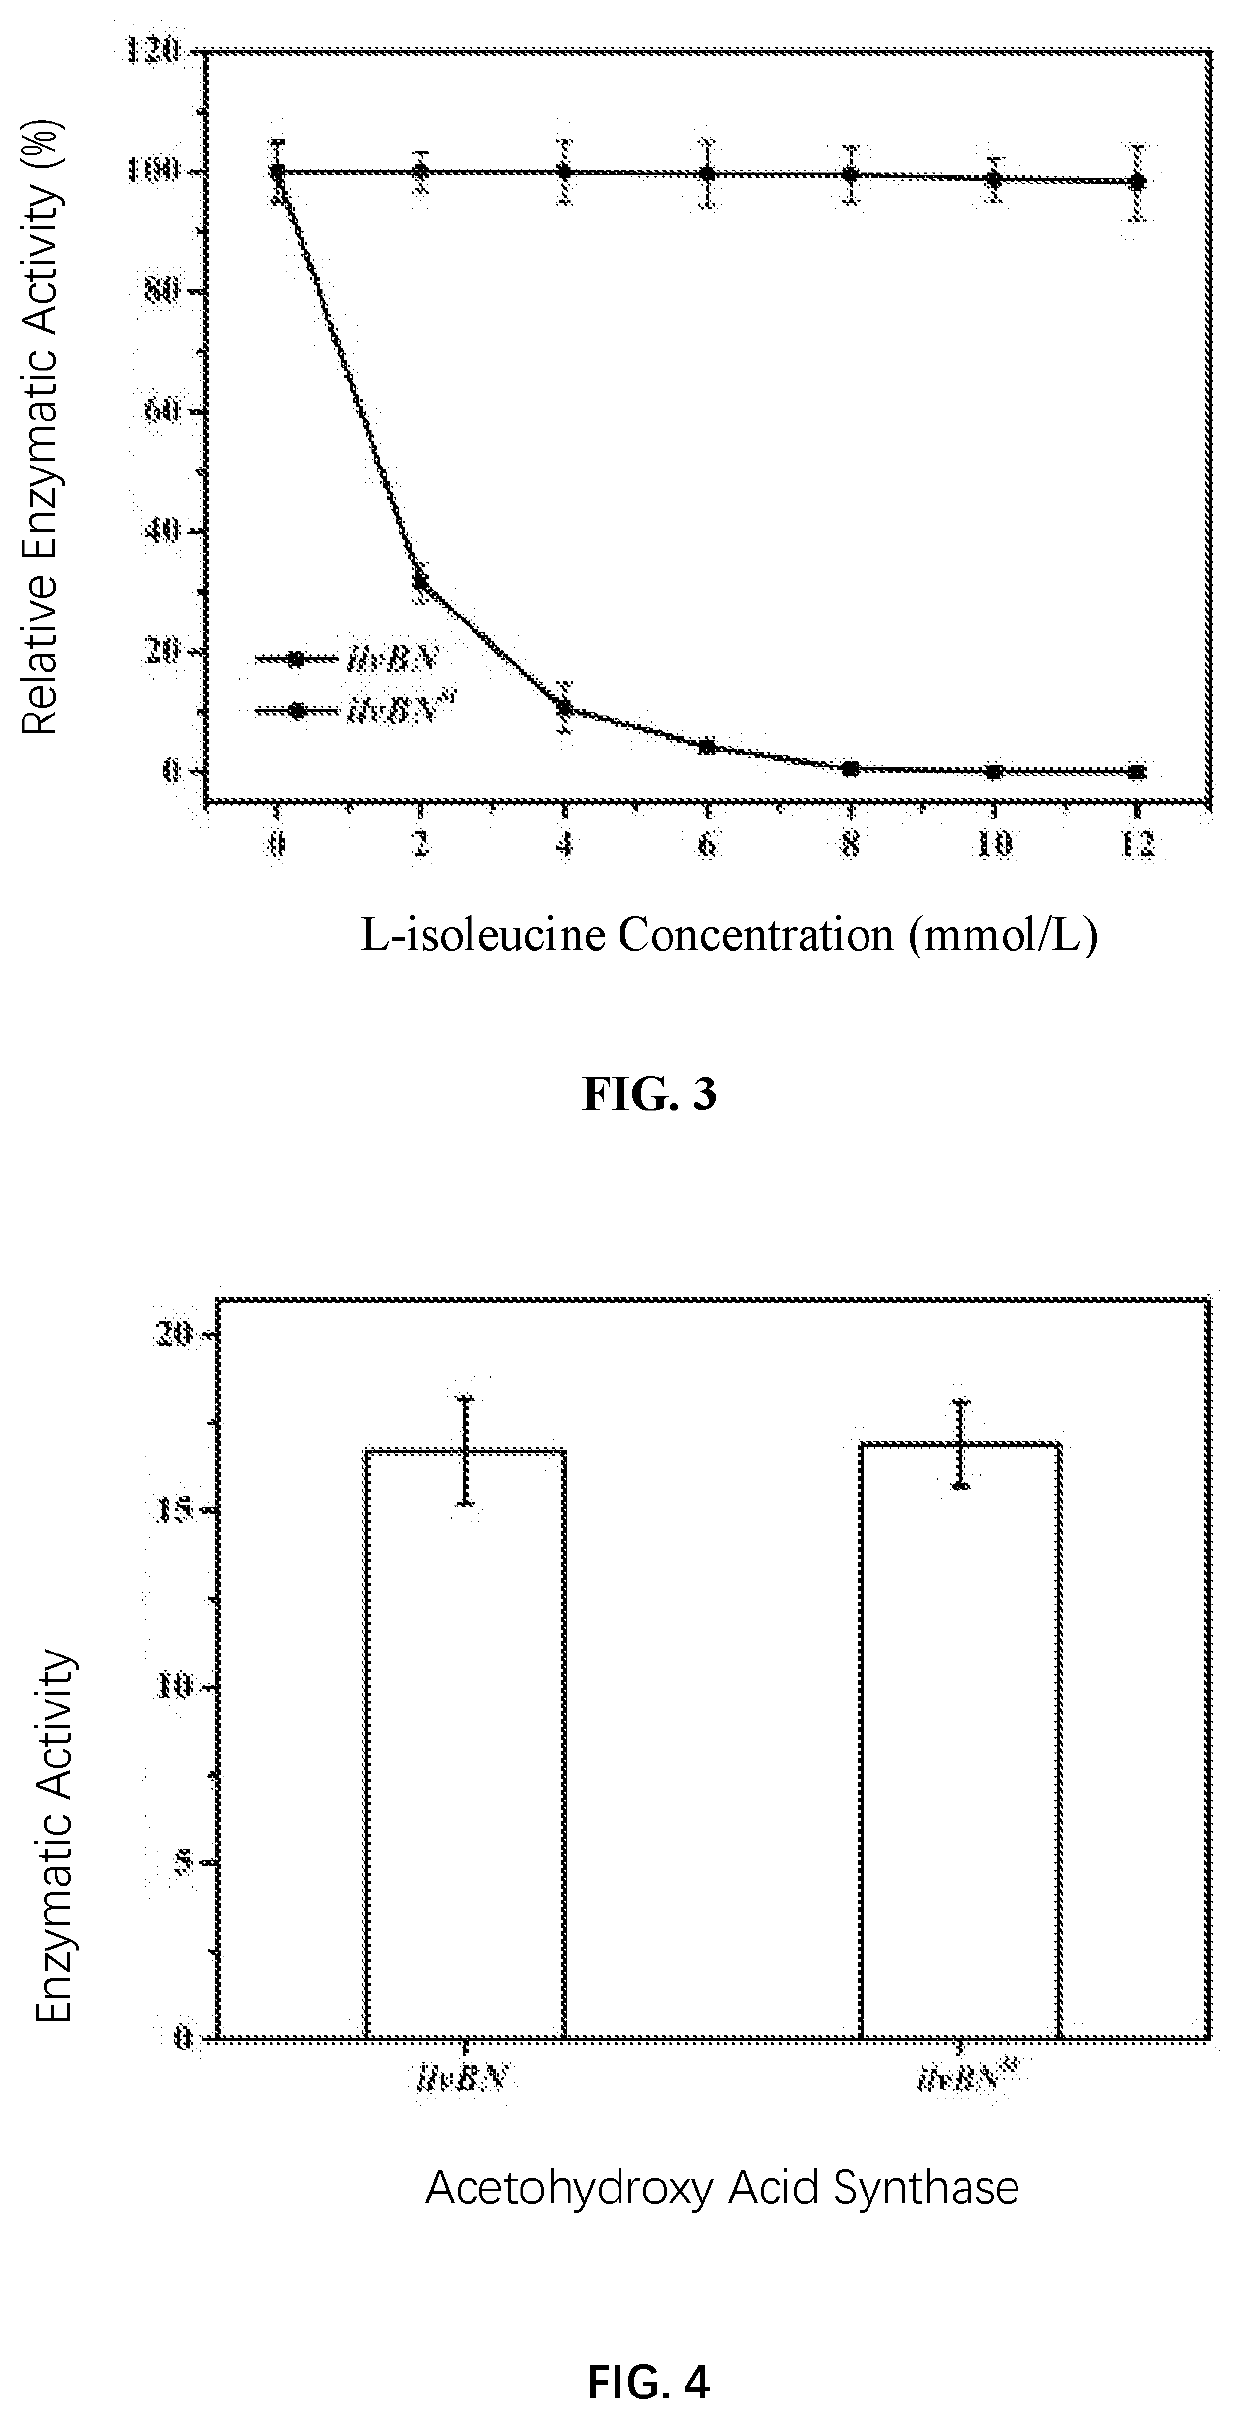 2-isopropylmalate synthetase and engineering bacteria and application thereof